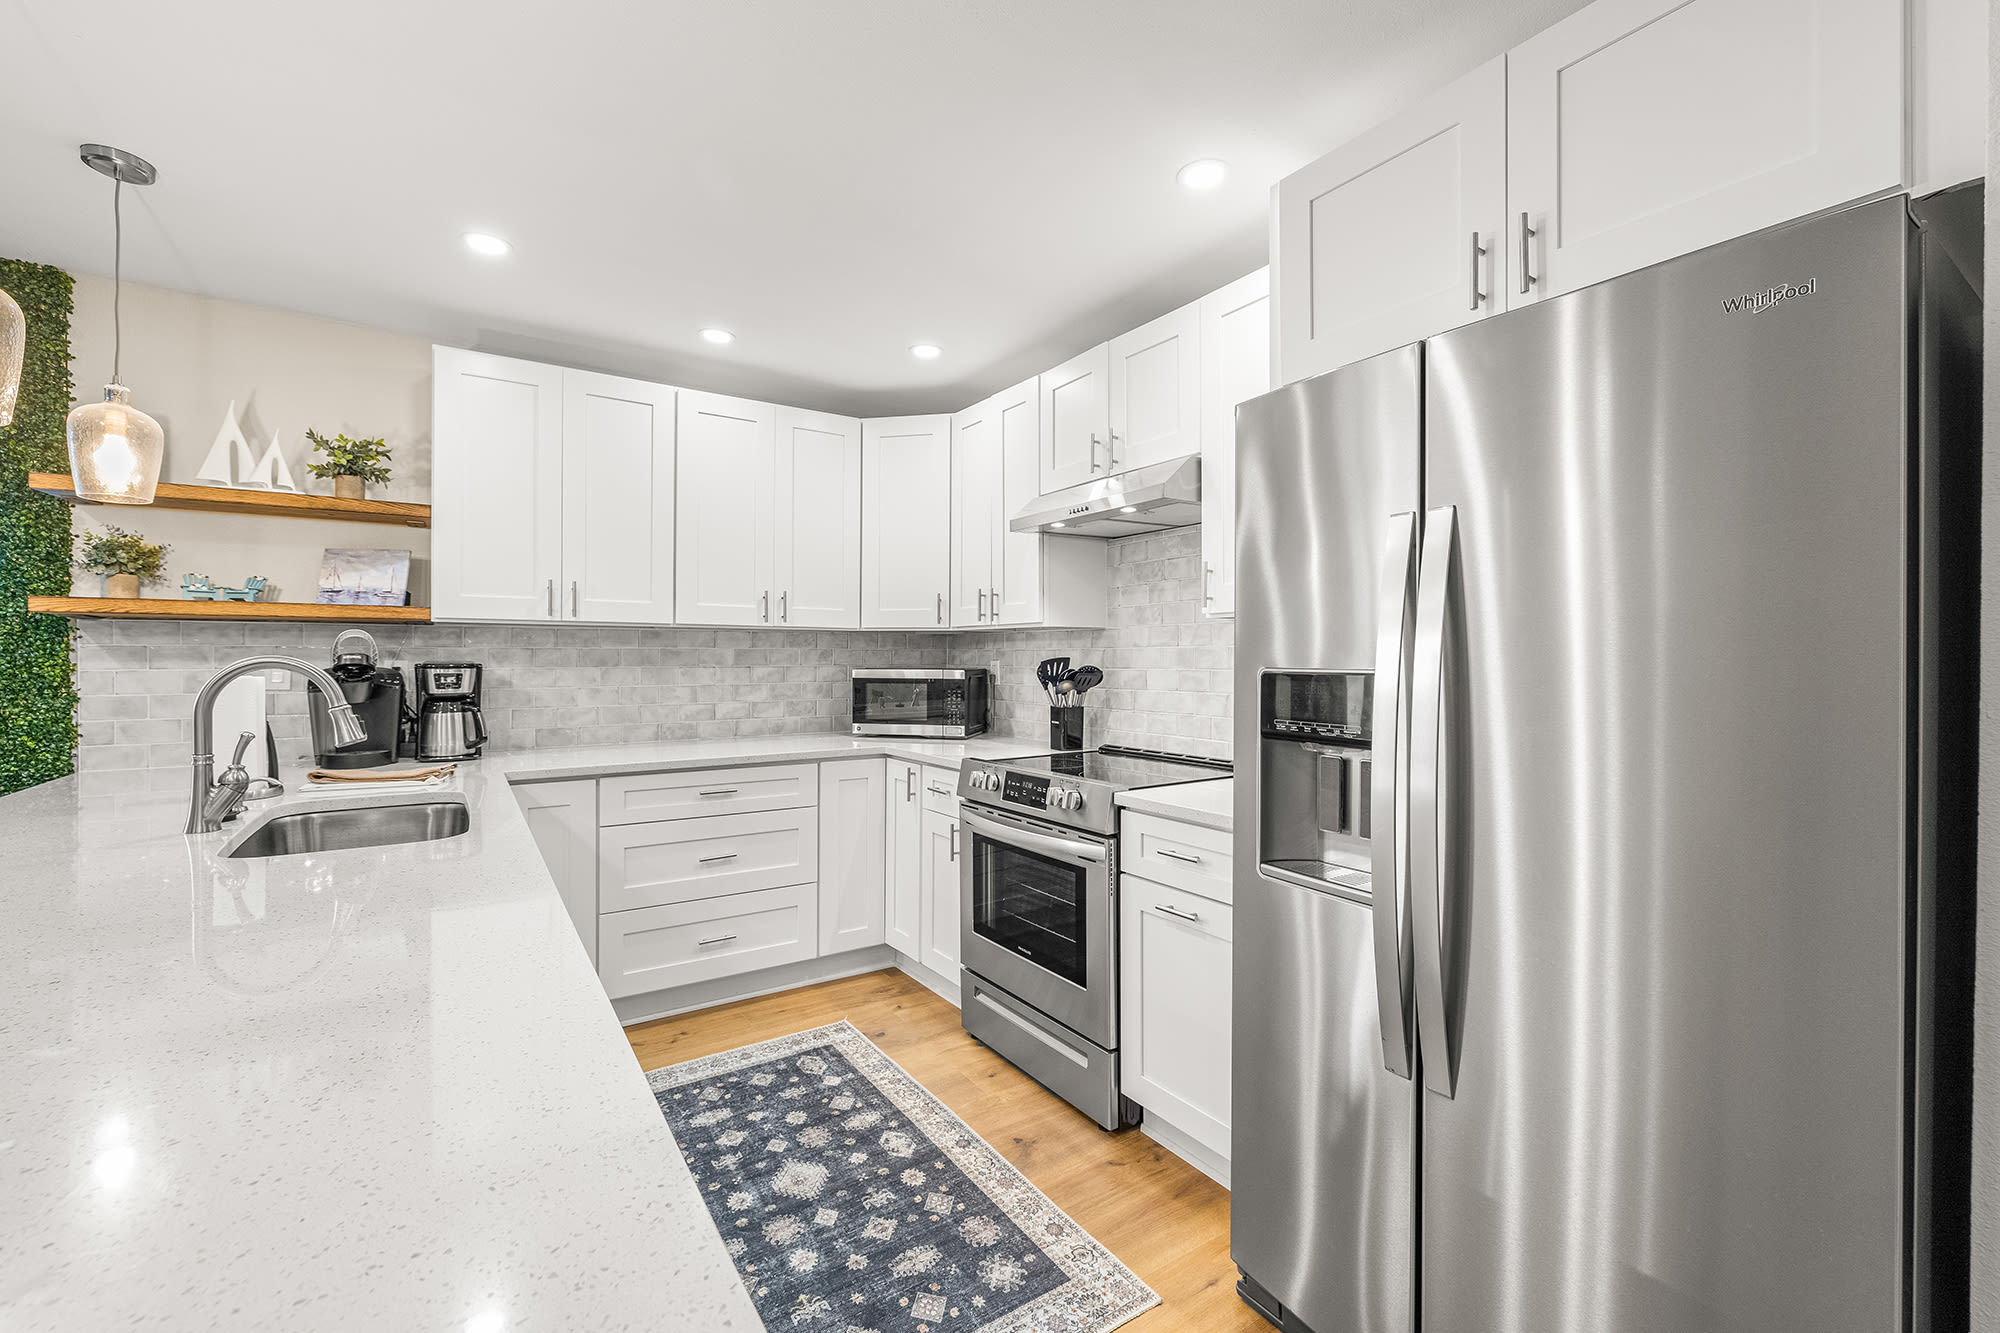 Need to whip up a meal? No problem! The kitchen features stainless steel appliances, a keurig and drip coffee maker, blender, cookware, & more!